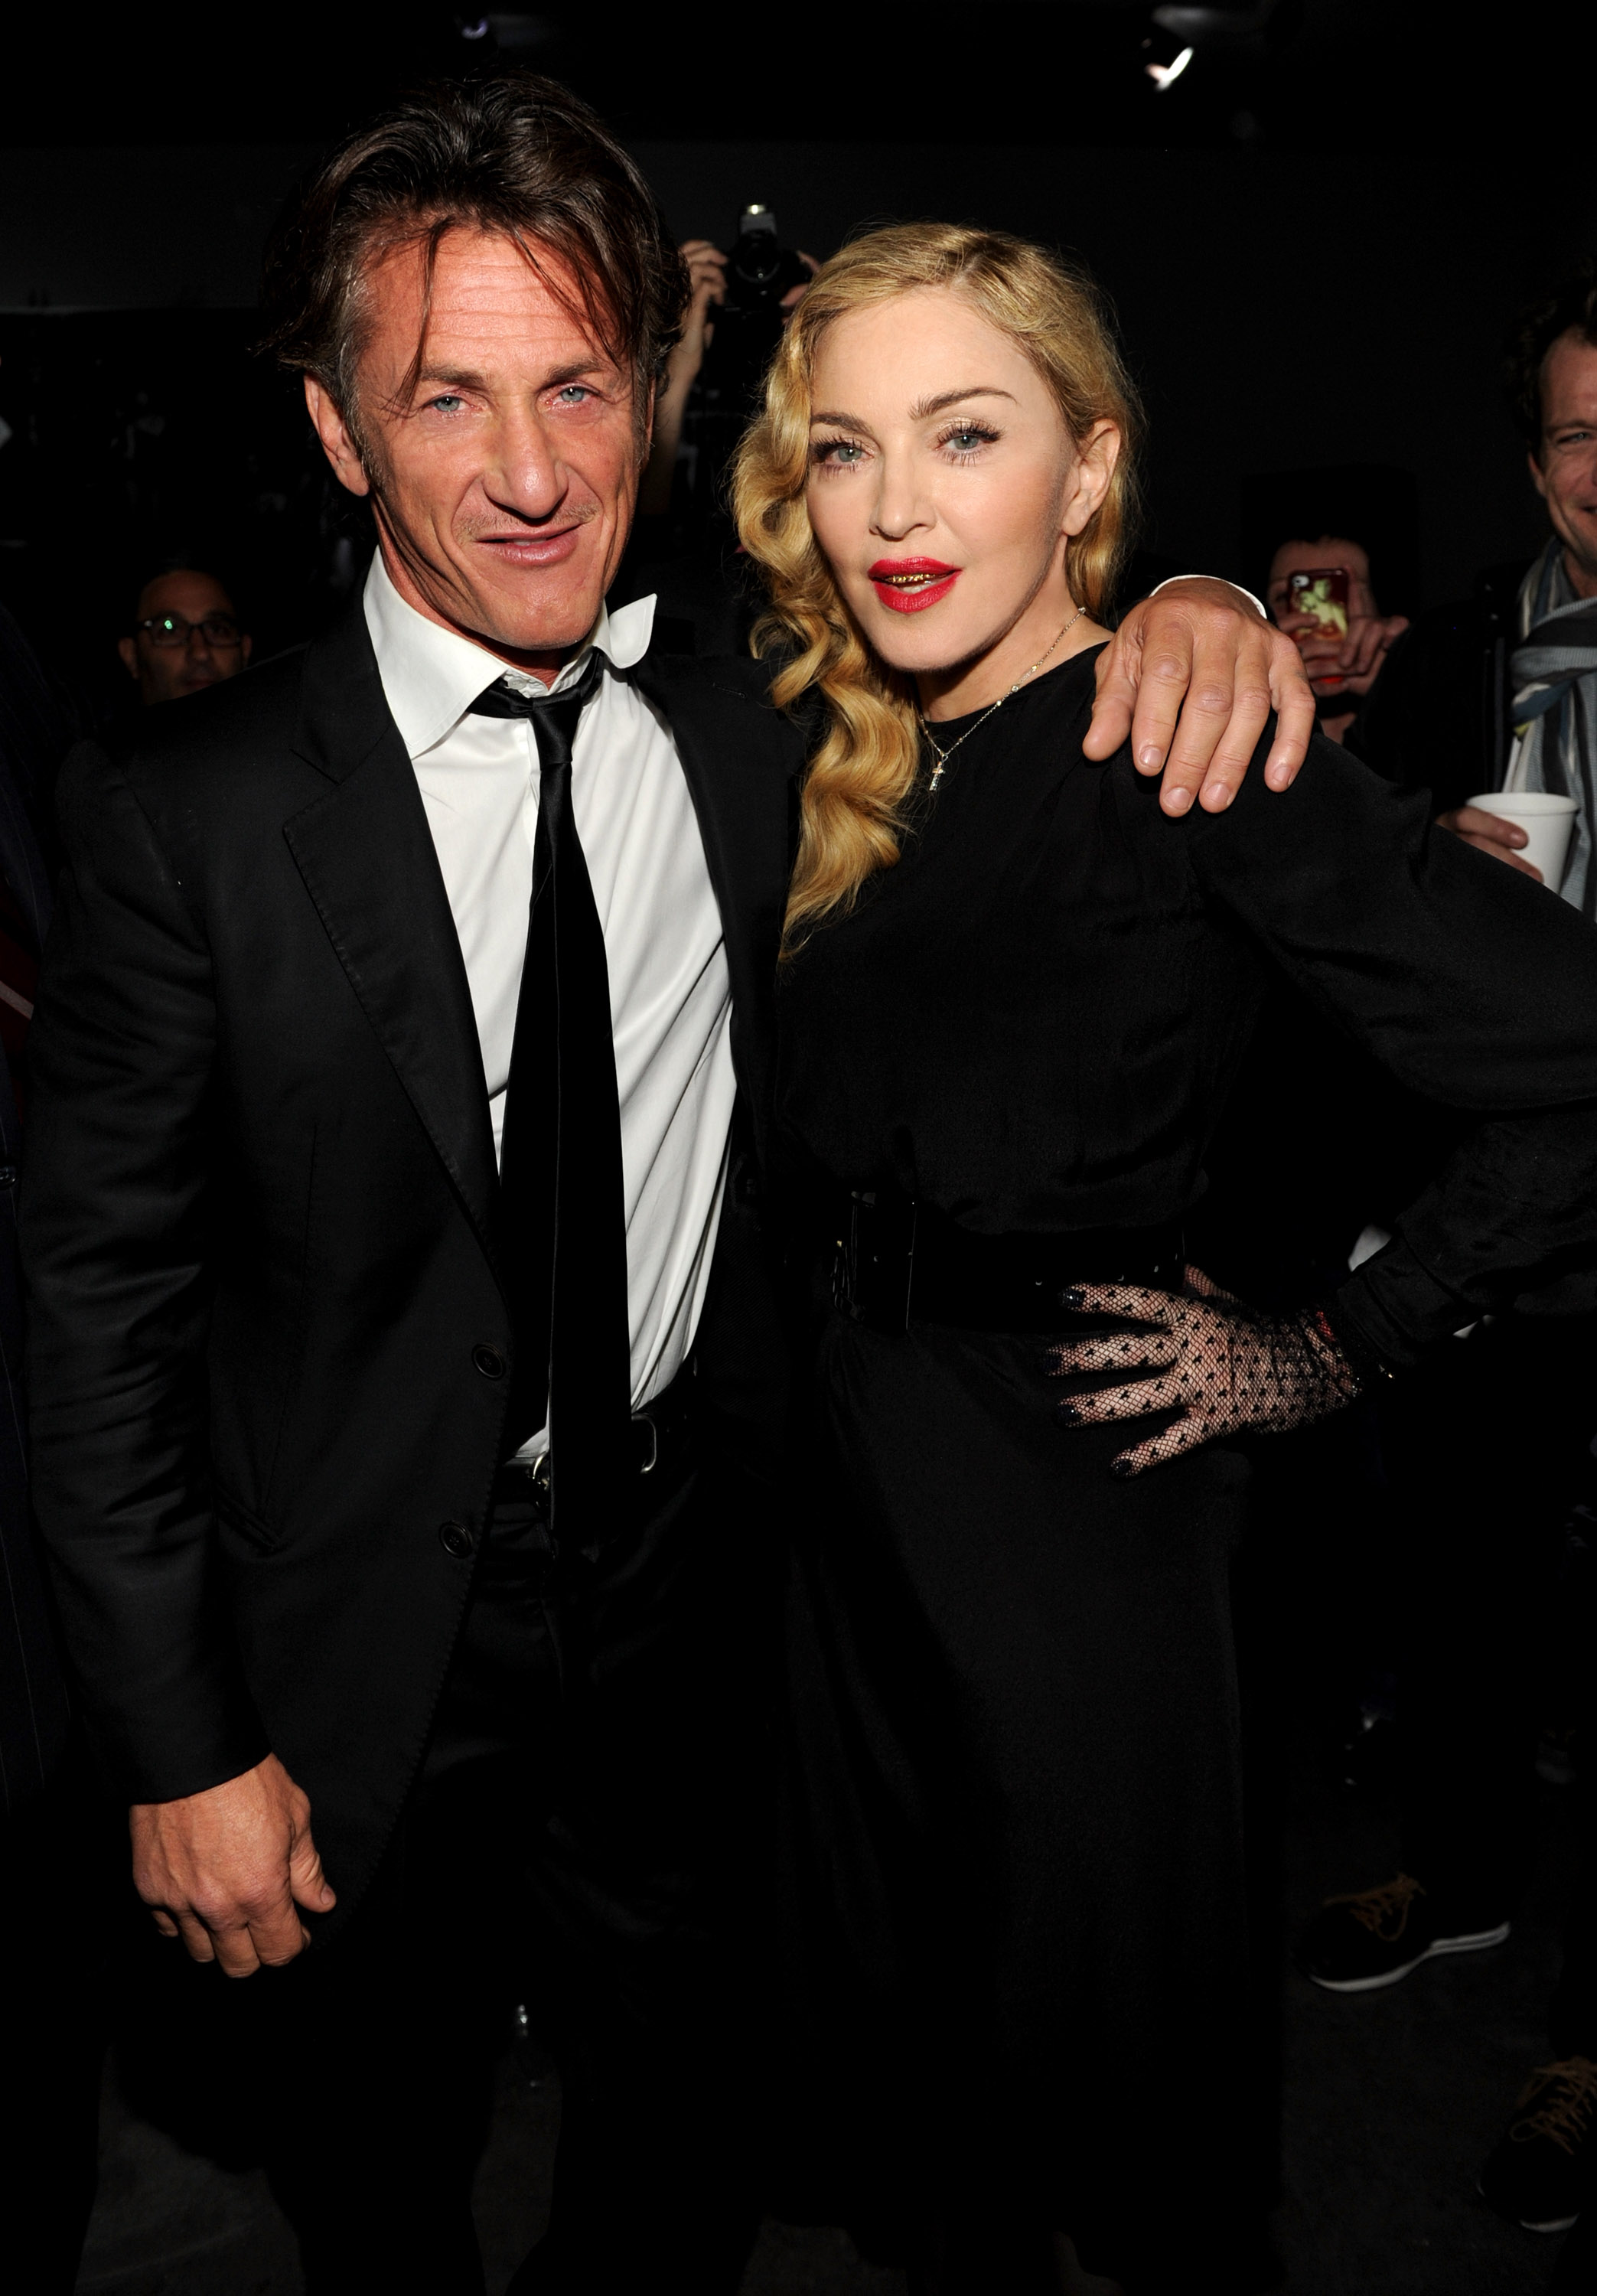 Sean Penn and Madonna at the Gagosian Gallery on Sept. 24, 2013 in New York City.